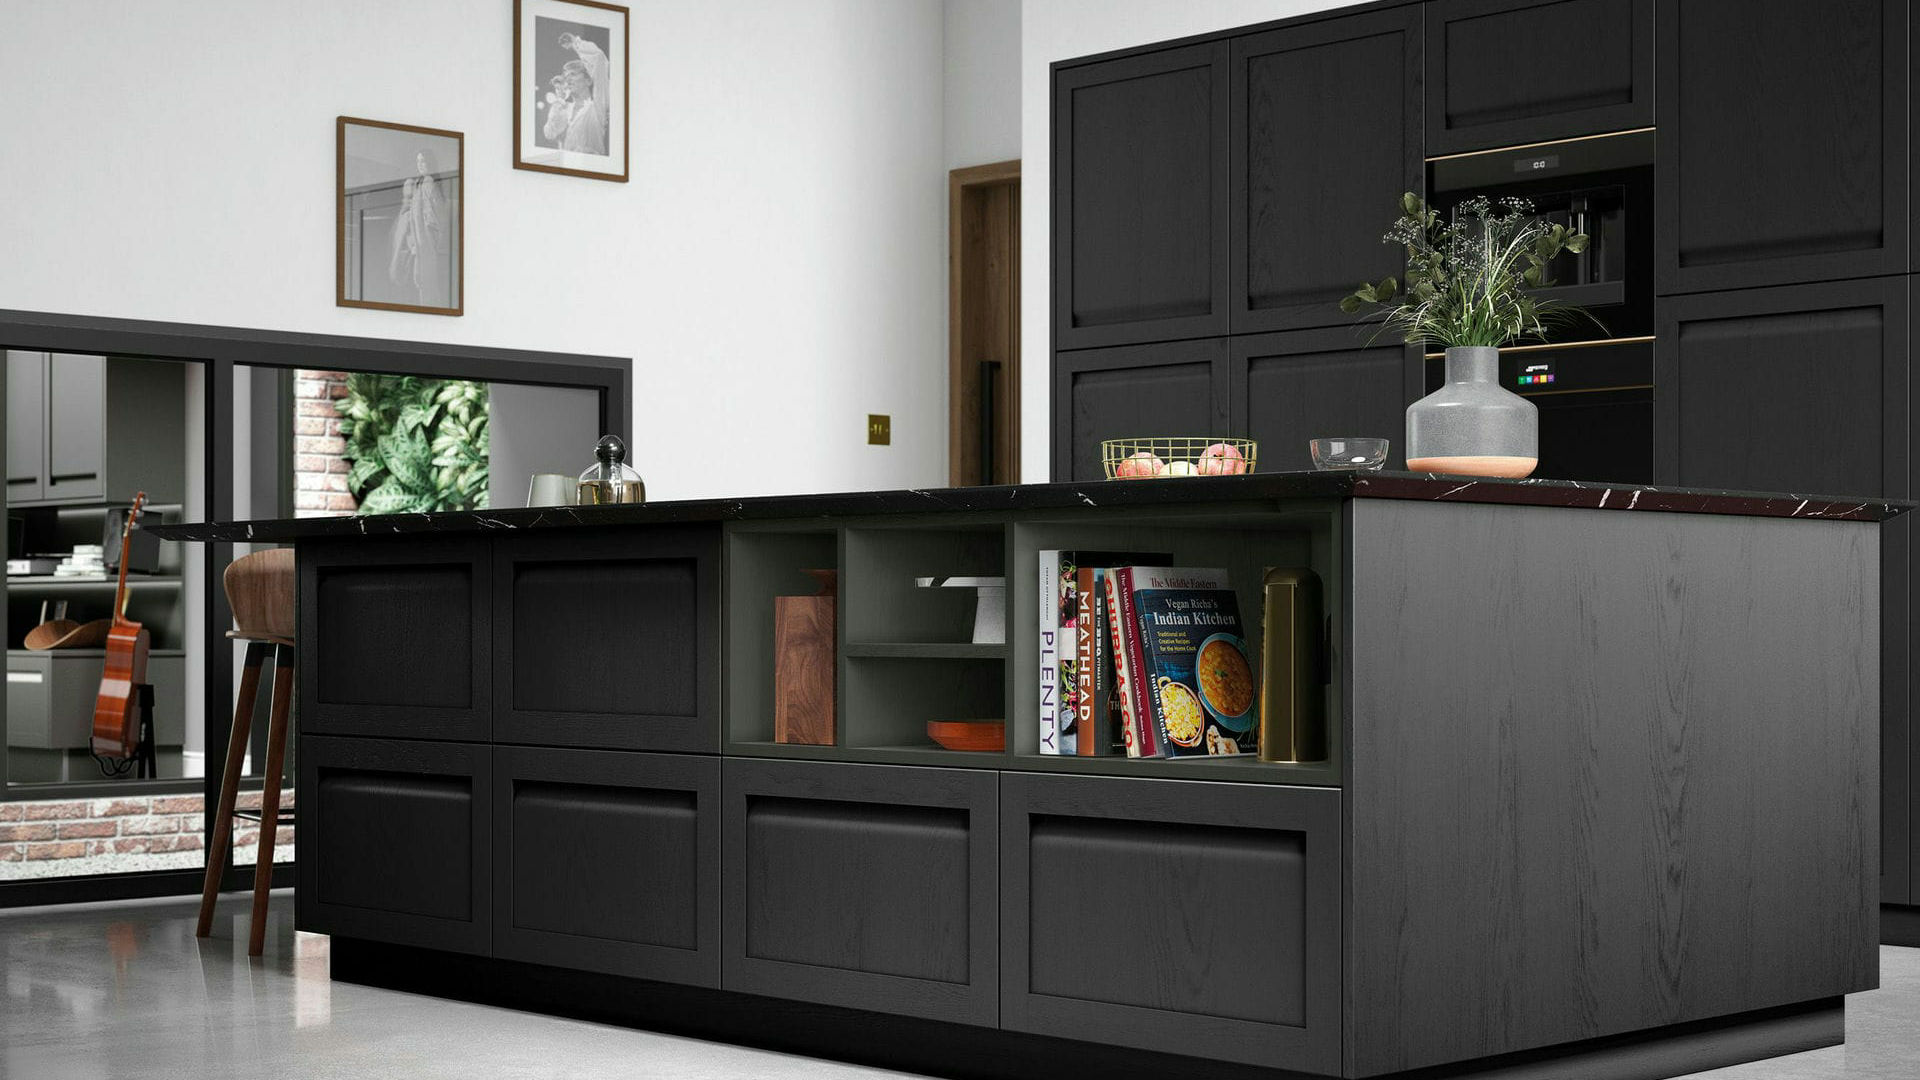 Handleless solid wood graphite kitchens showcasing a fusion of contemporary style and the natural beauty of wood